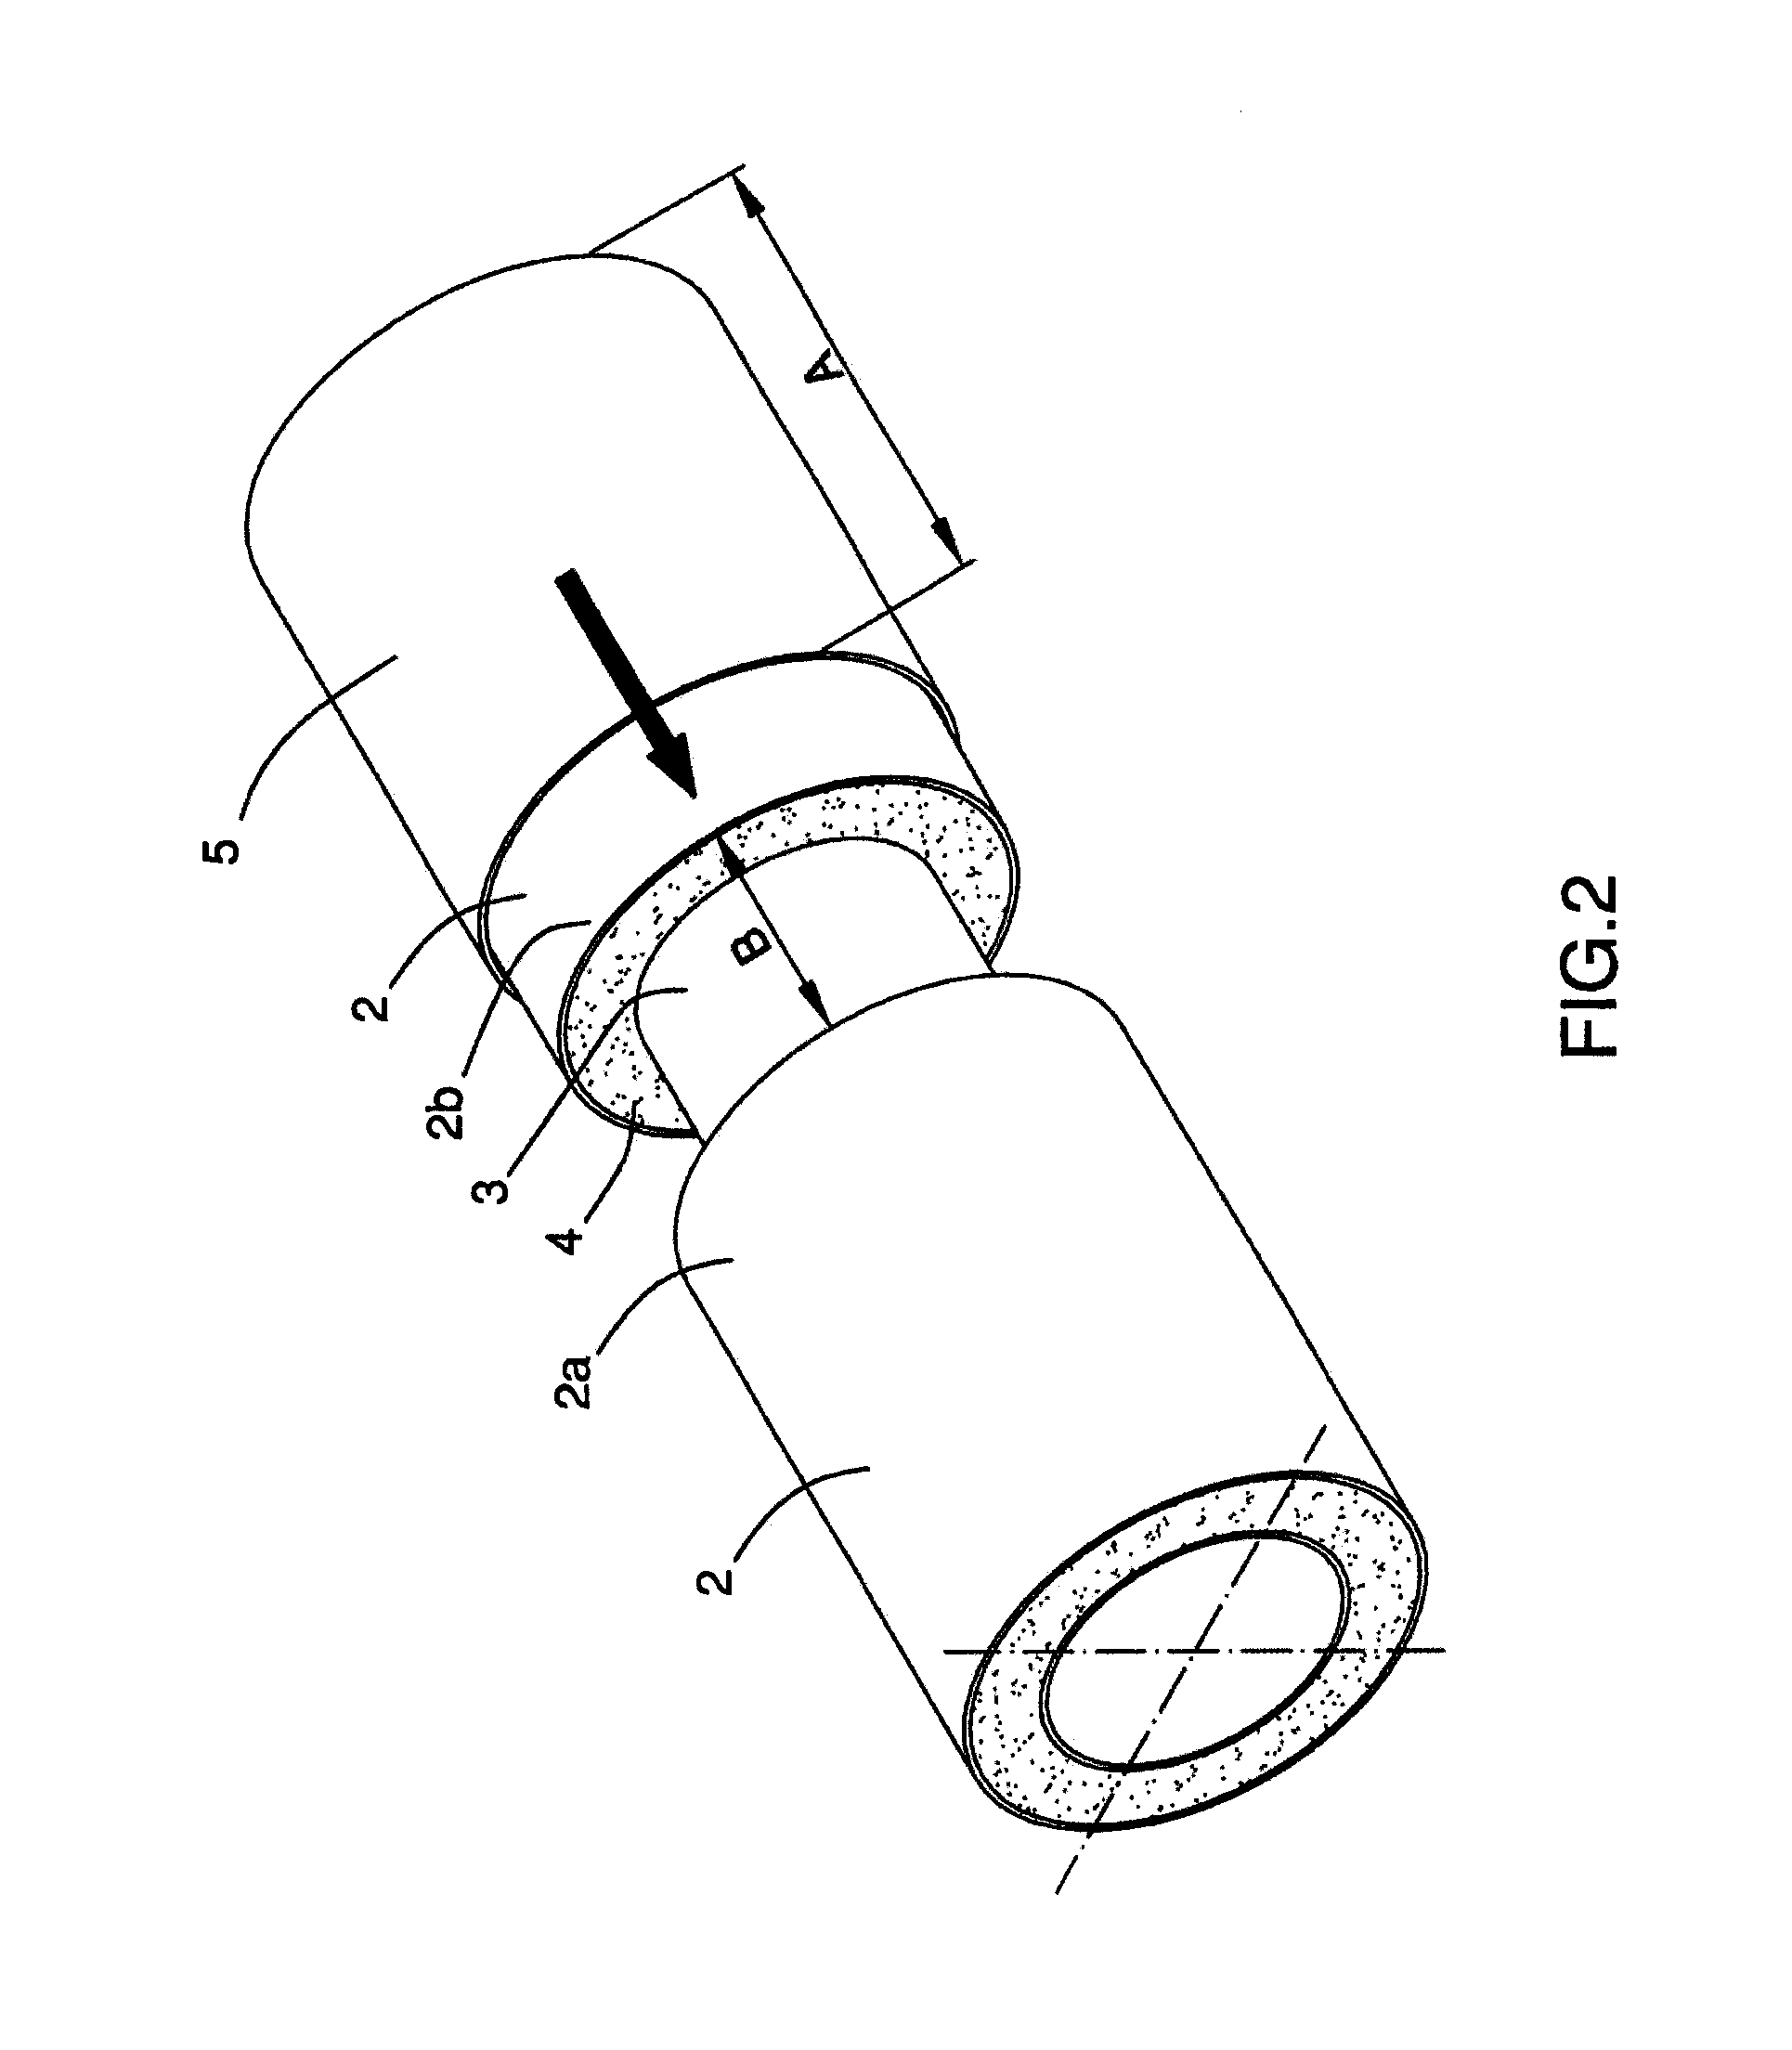 Method and apparatus for installtion and repair of pipe systems